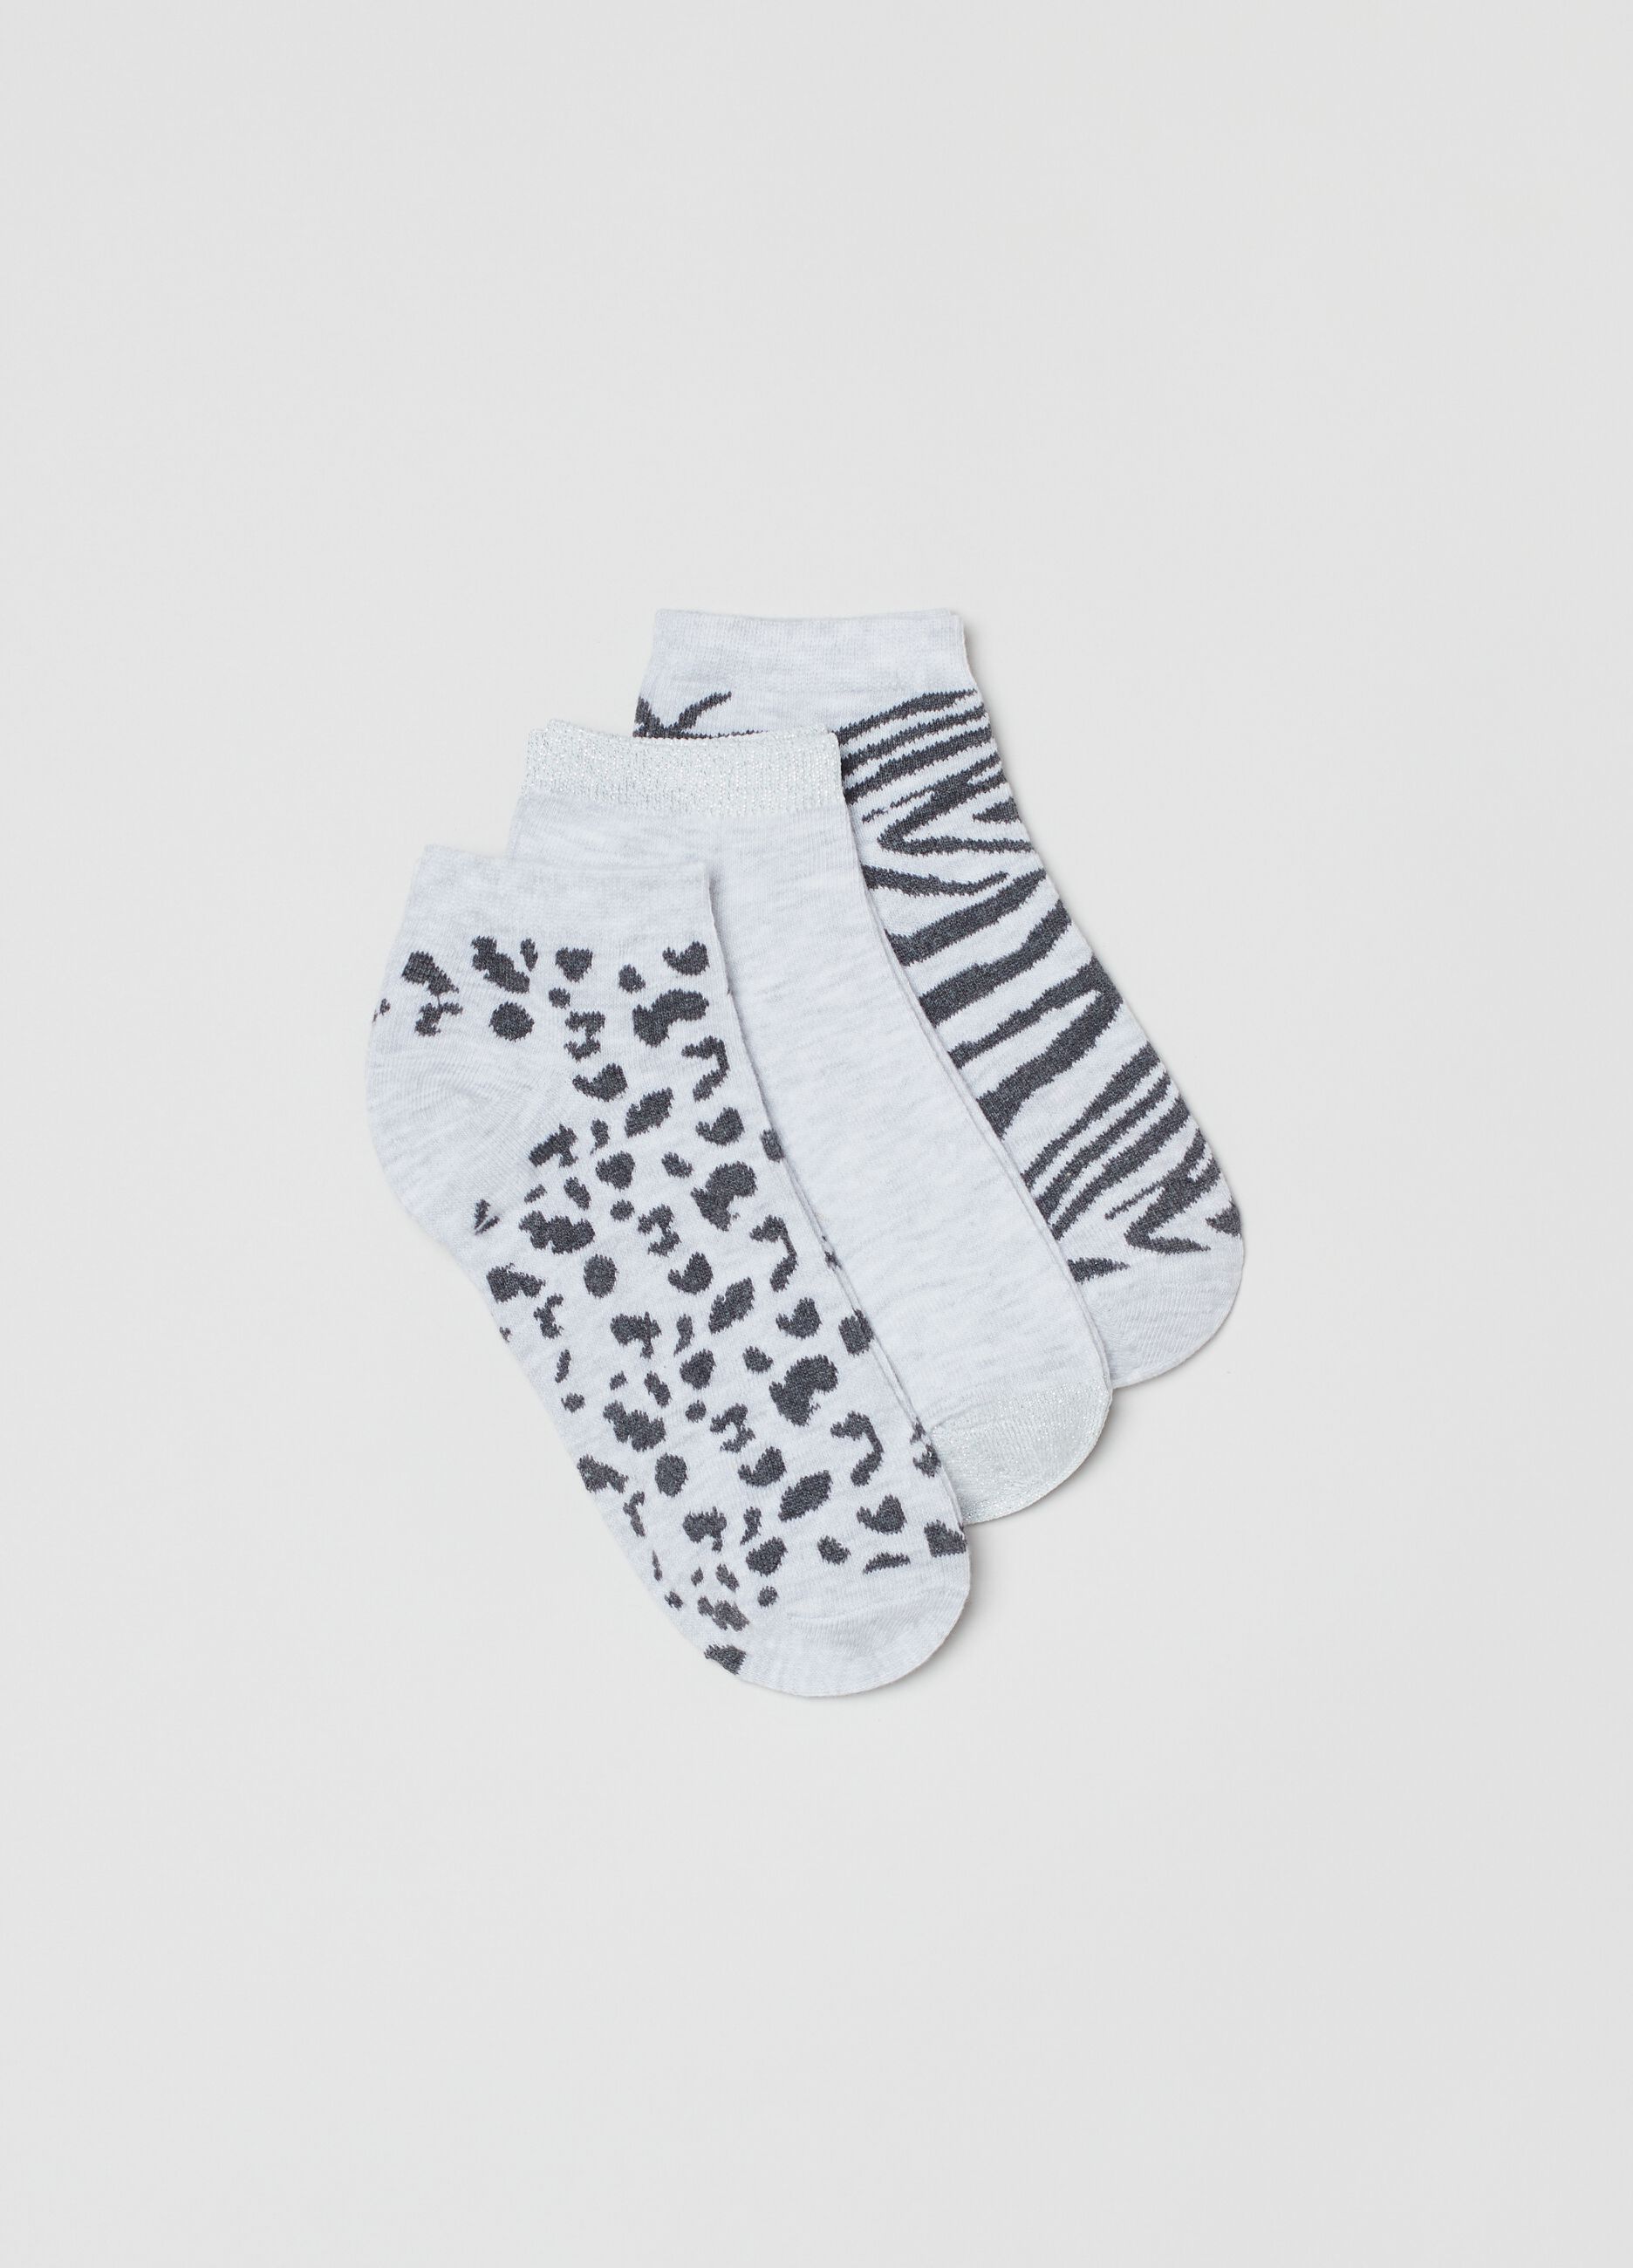 Three-pair pack shoe liners with animal print